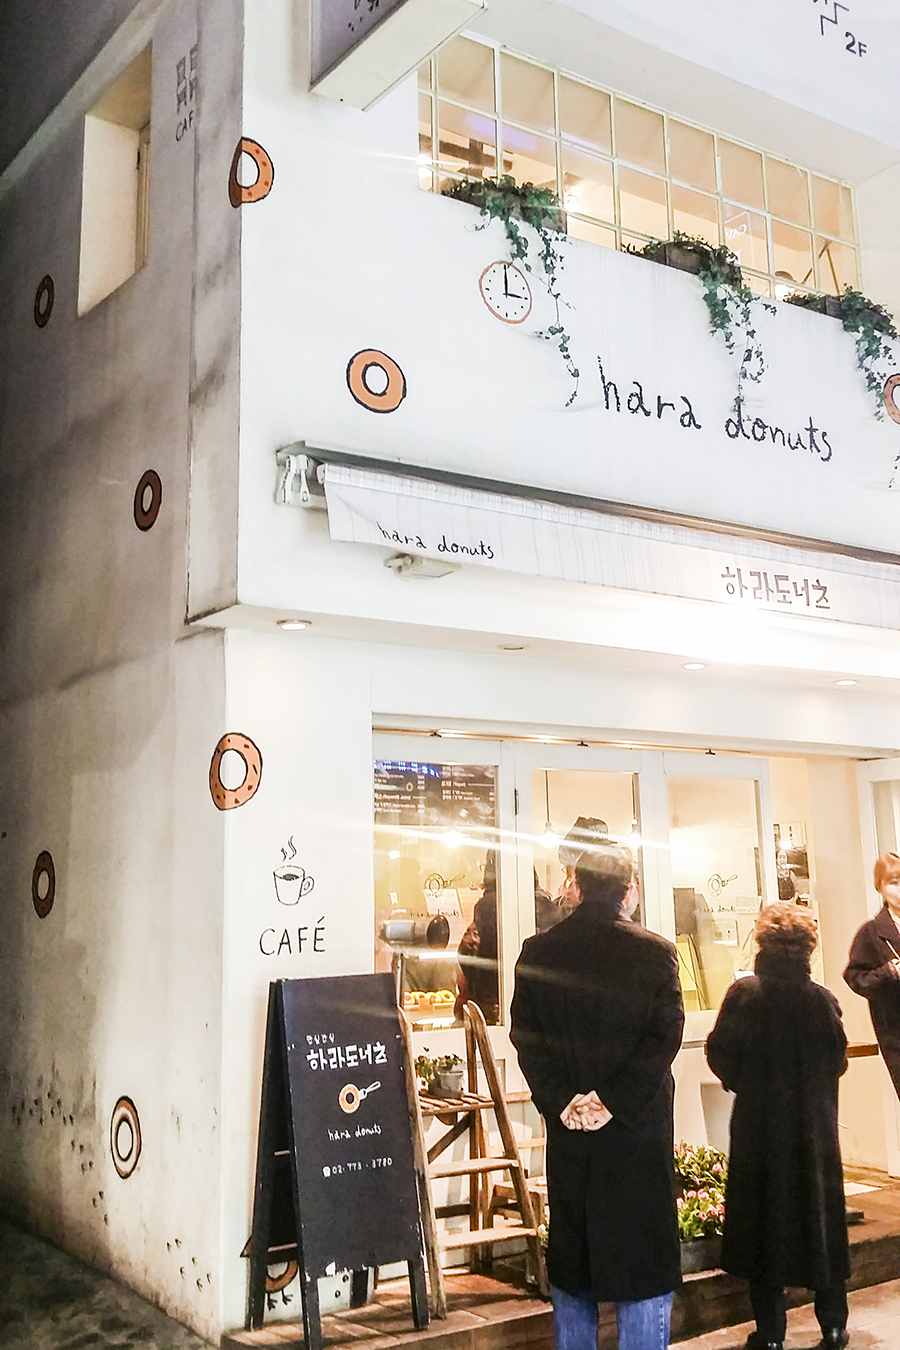 Cute exterior of Hard Donuts, a cafe in Myeongdong, Seoul, South Korea.